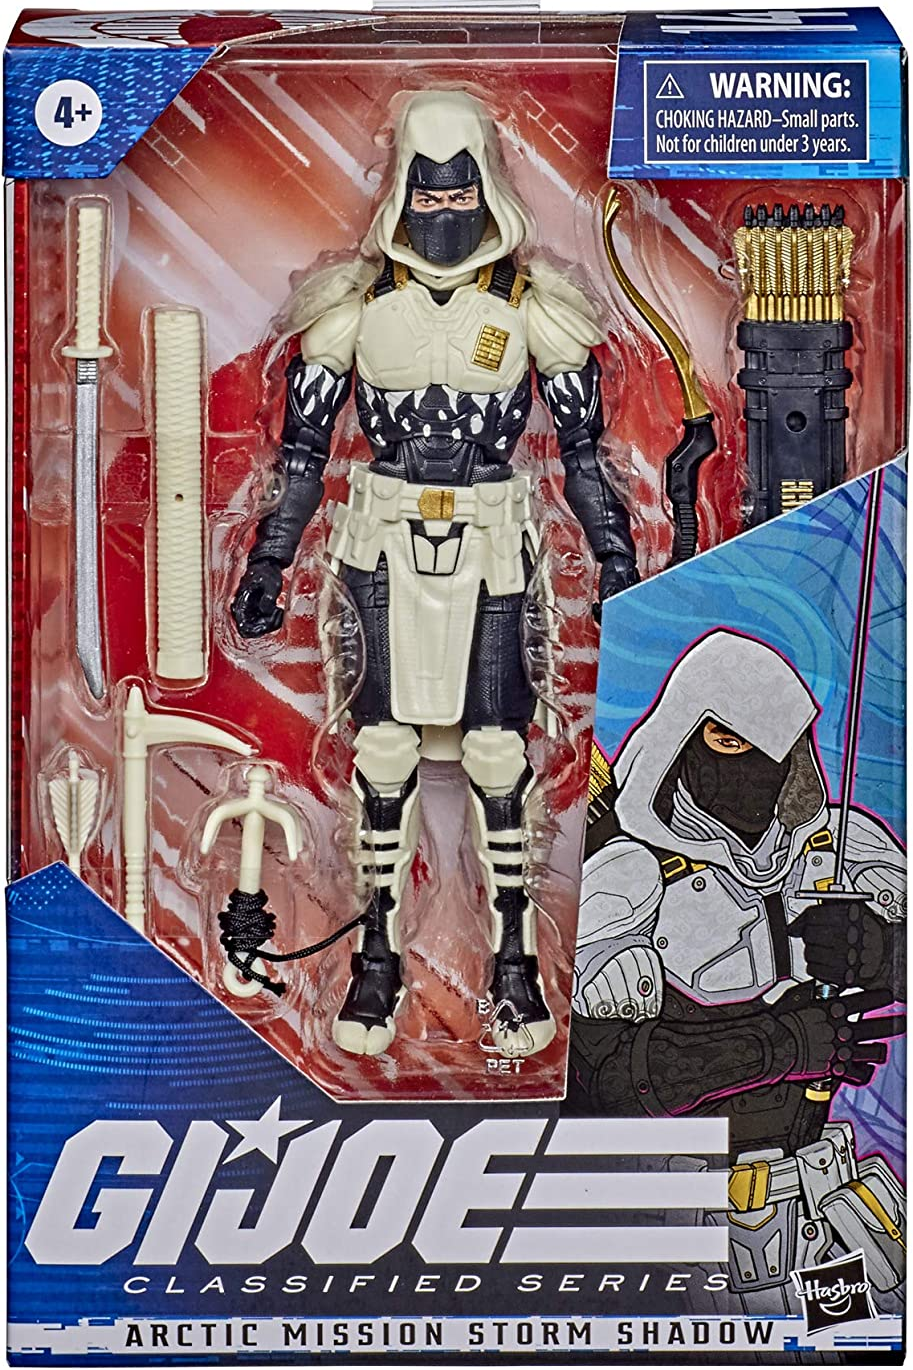 14- Storm Shadow (Arctic Mission Variant)